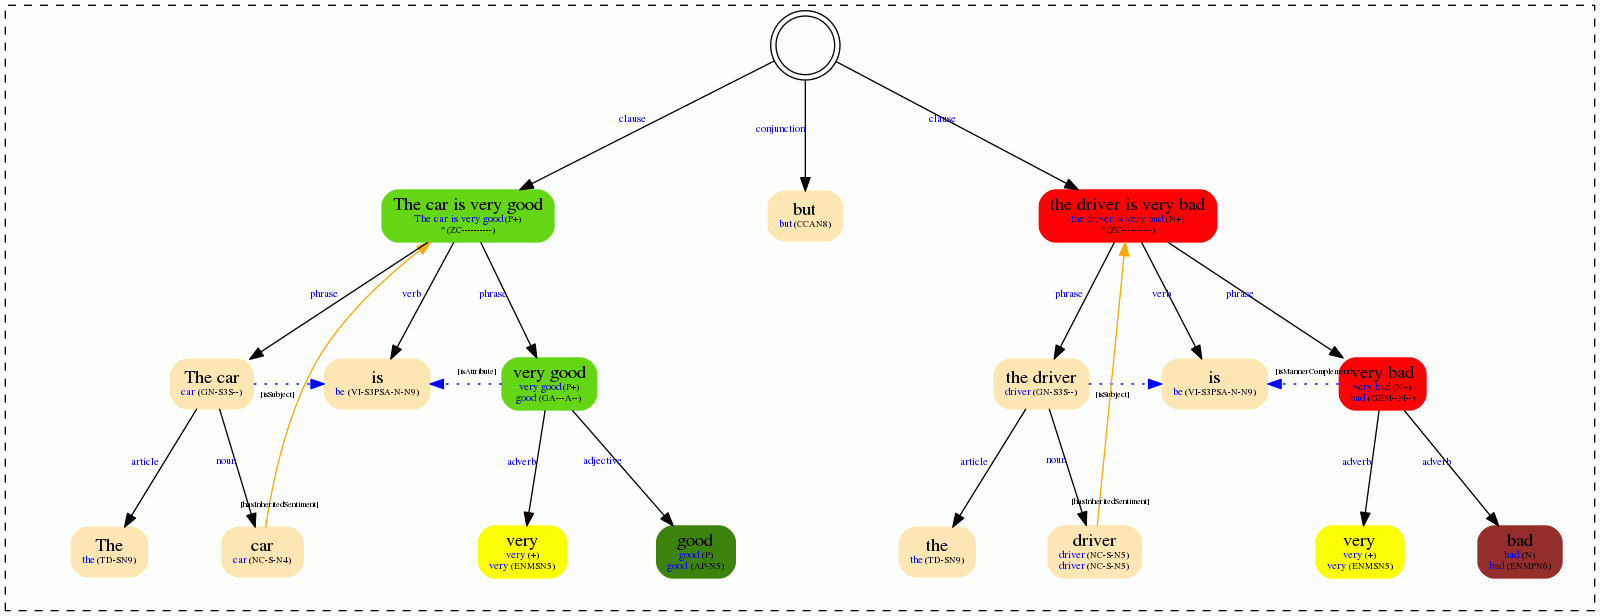 Morphosyntactical tree with sentiment